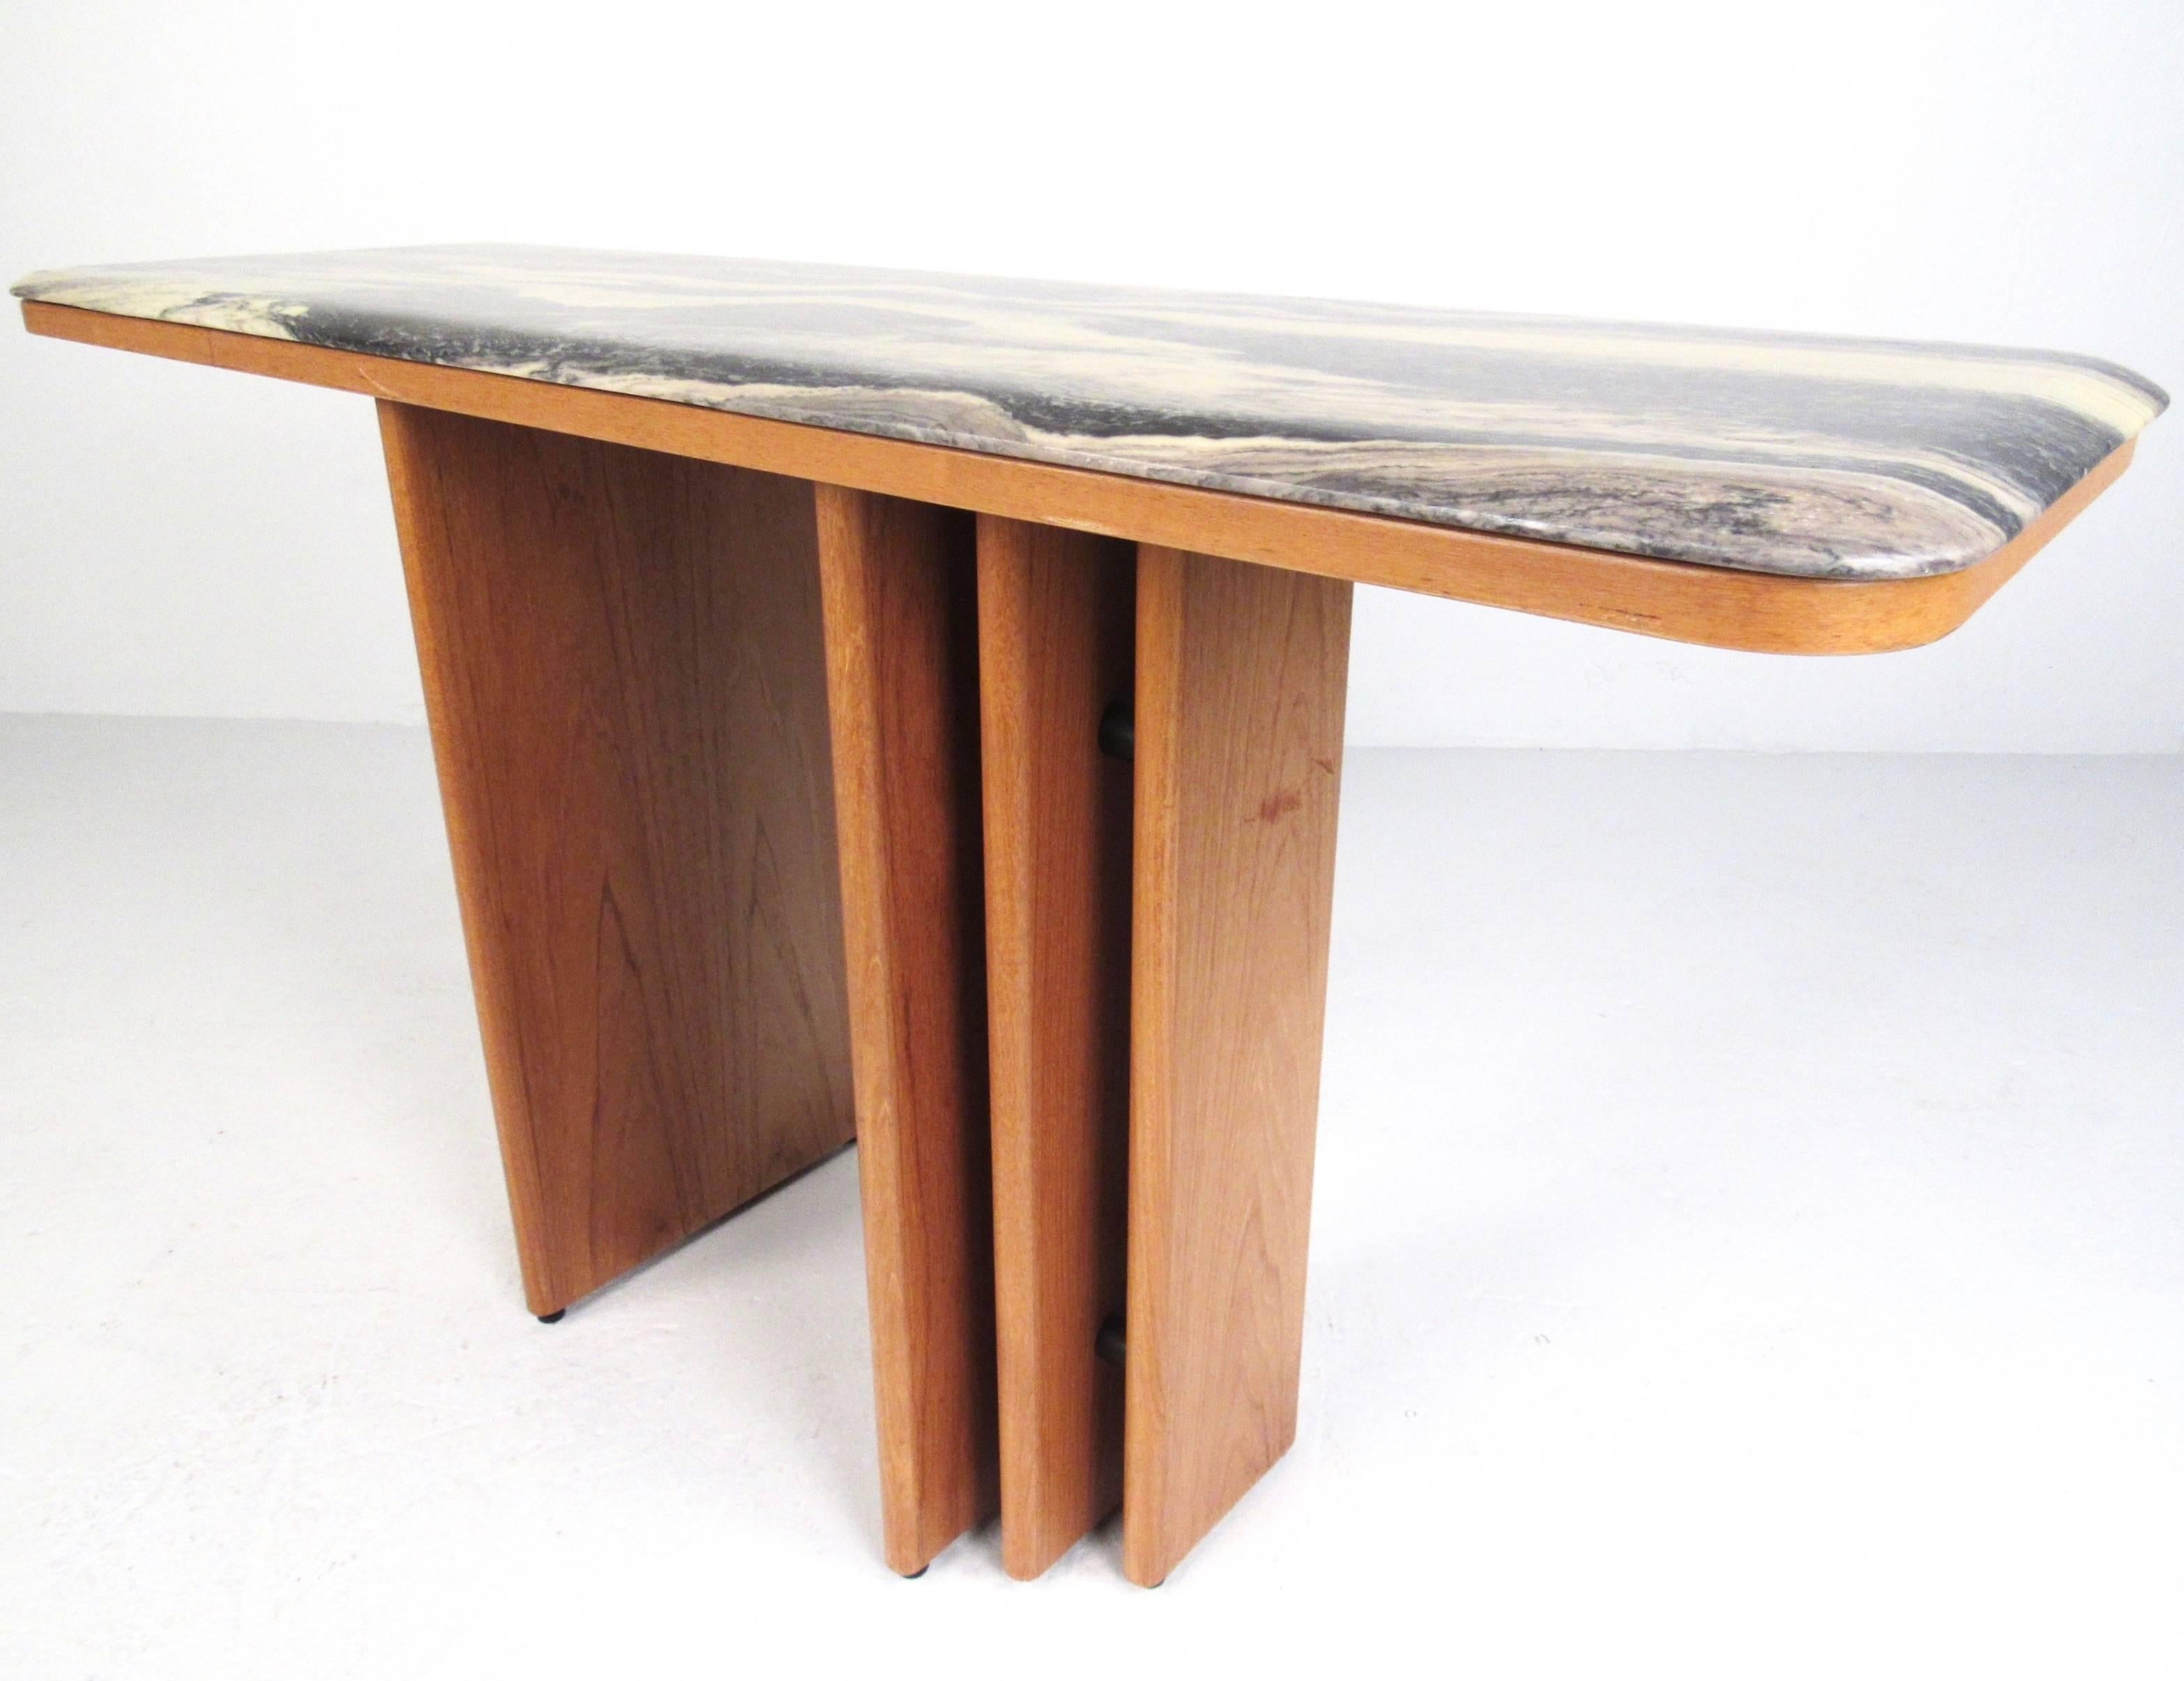 This vintage Danish teak console table features a sleek and stylish flared base design topped with a stunning marble top. Rounded edges and the unique Mid-Century Modern style of this Scandinavian console table make it a beautiful addition to